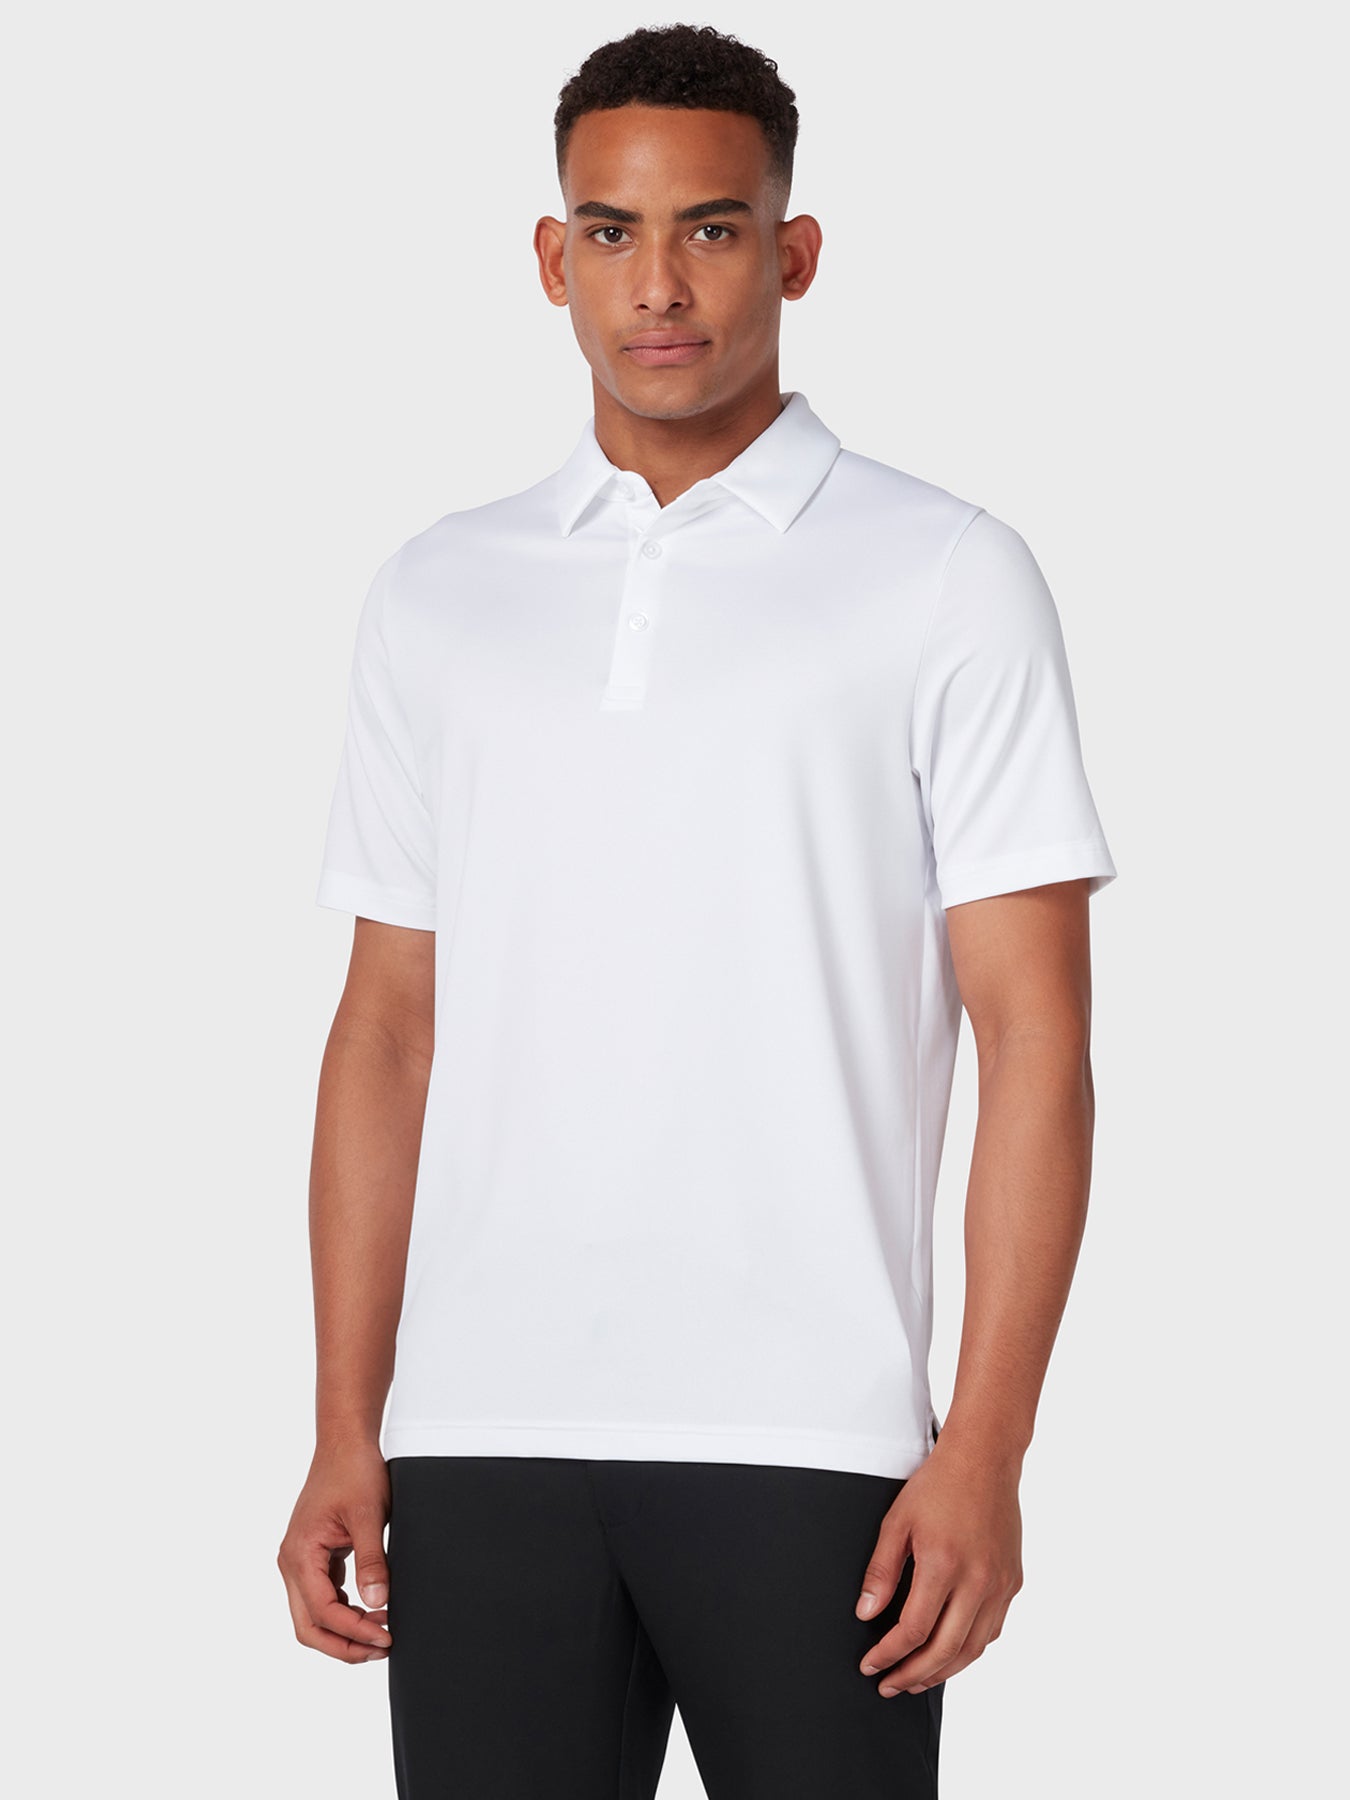 View Swing Tech Tour Polo In Bright White Bright White S information